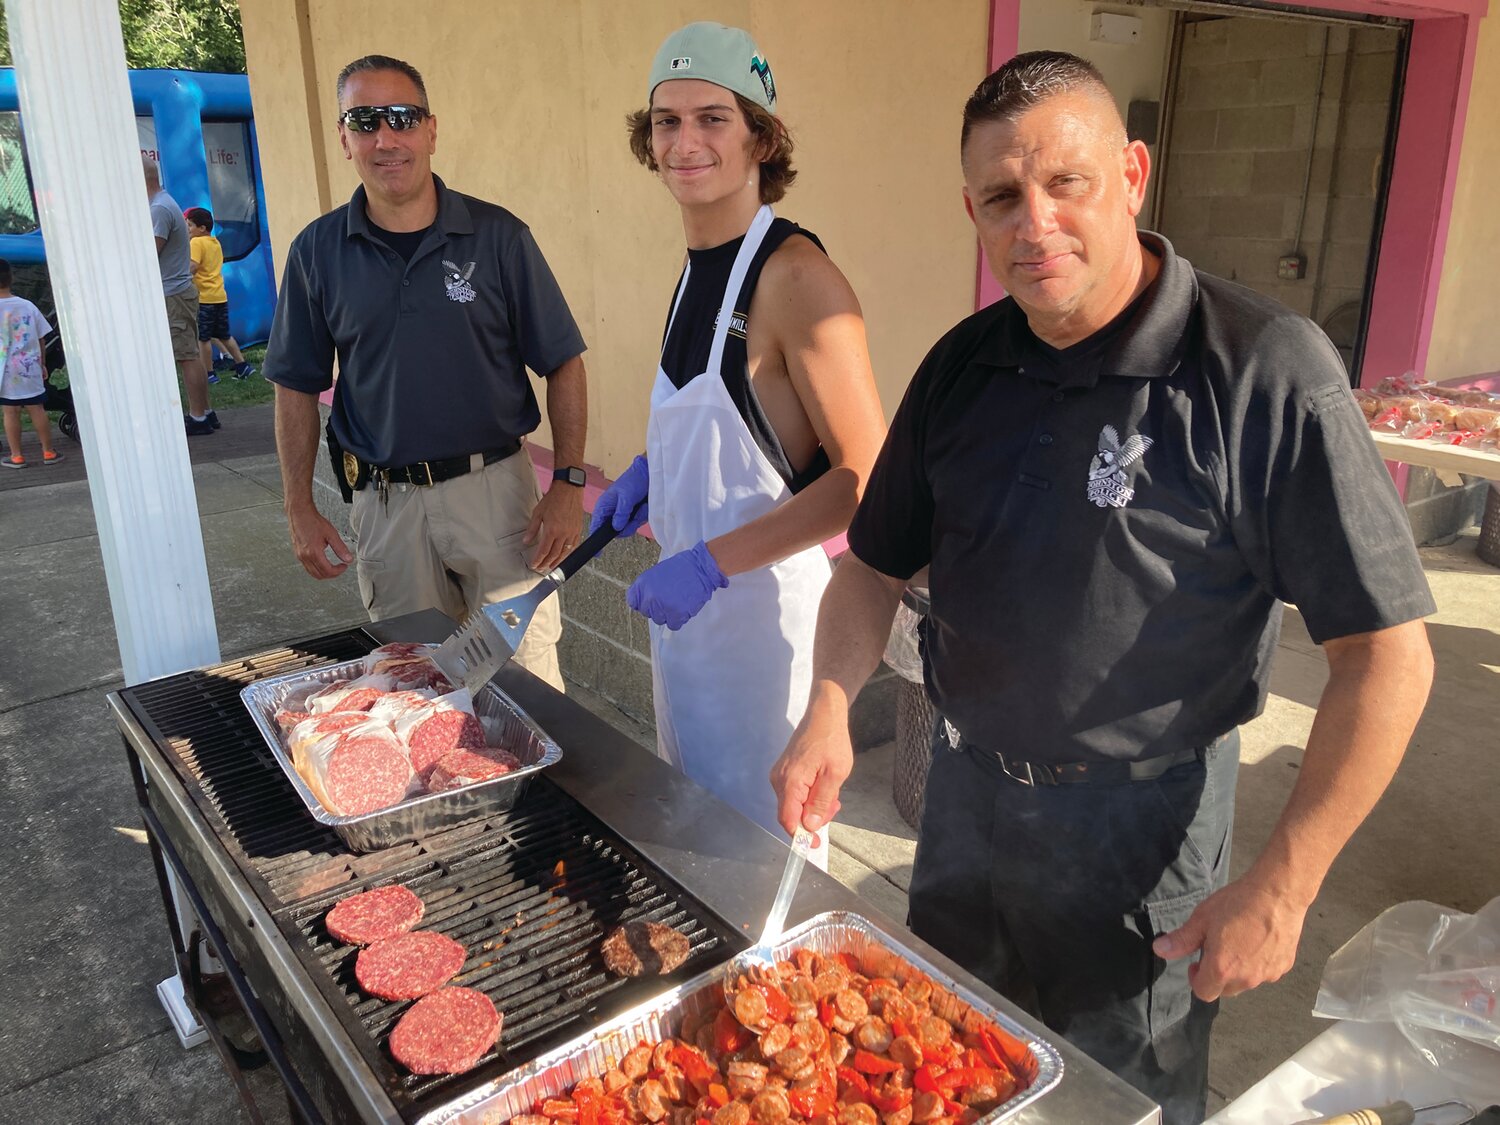 ON THE GRILL: Sgt. Luca Lancelotti, Mike Psilopoulos, and his father, Officer Charles Psilopoulos helped man the grills that were busy all evening.